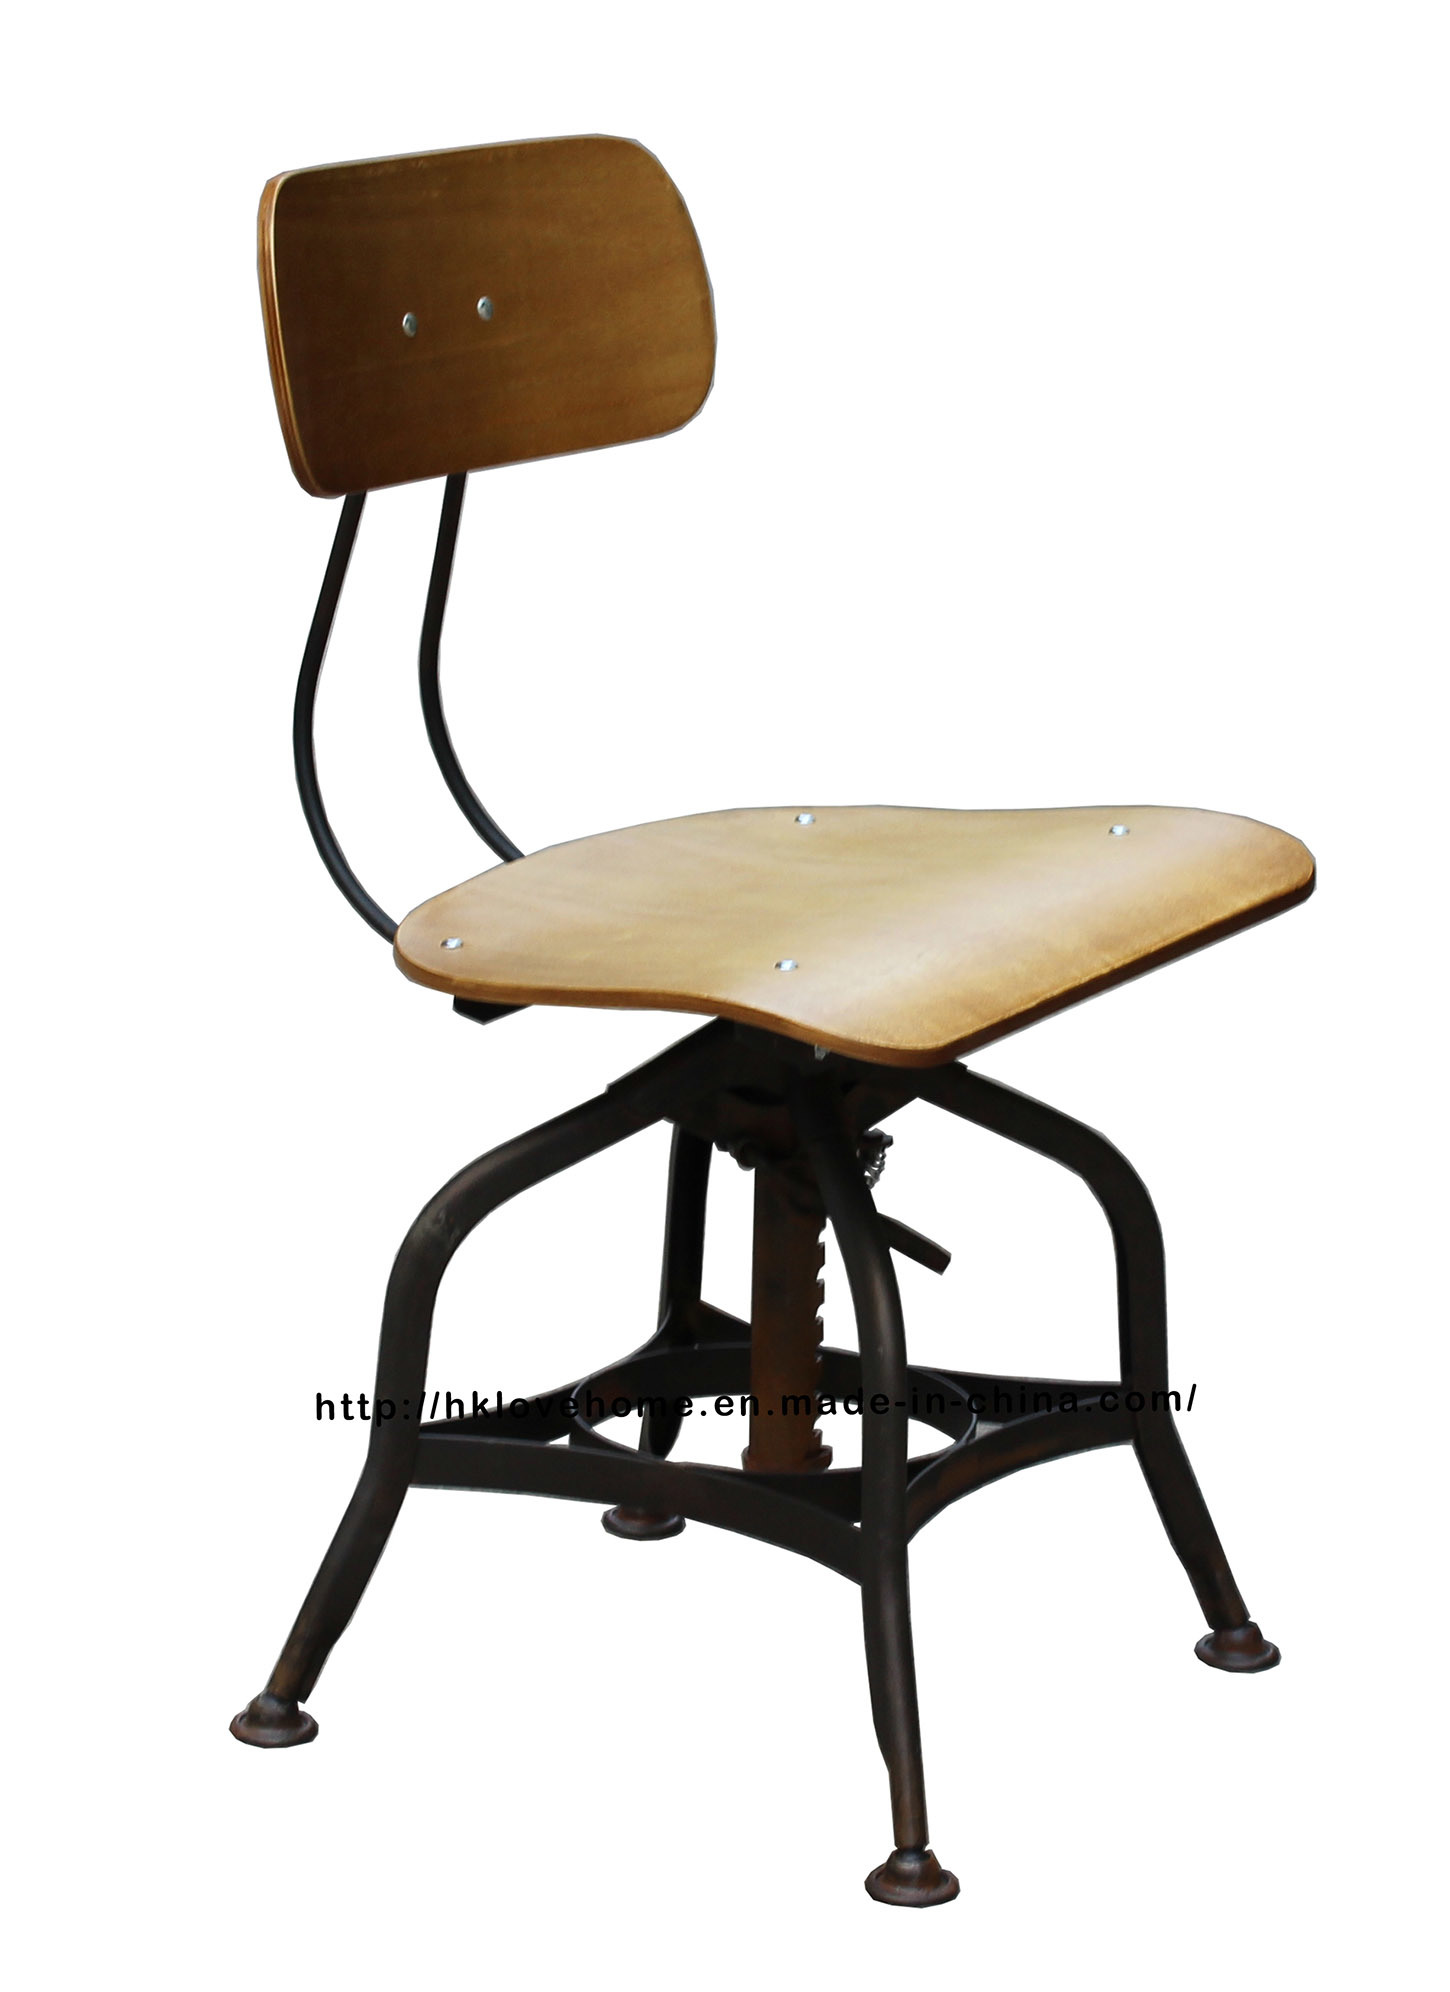 Industrial Replica Vintage Toledo Wooden Bar Stools Dining Chairs